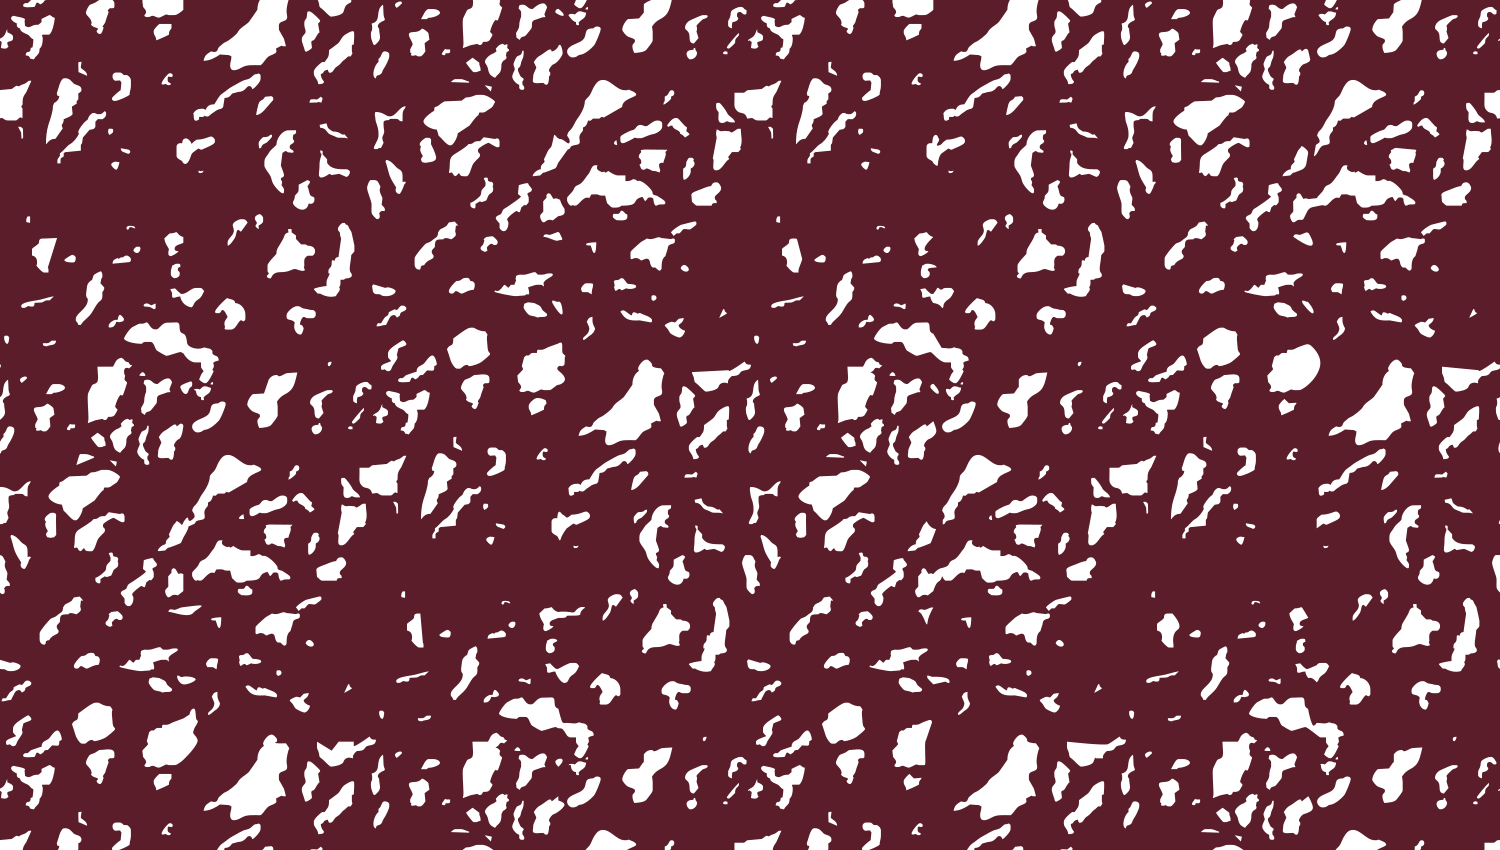 Parasoleil™ Winter Branches© pattern displayed with a burgundy color overlay